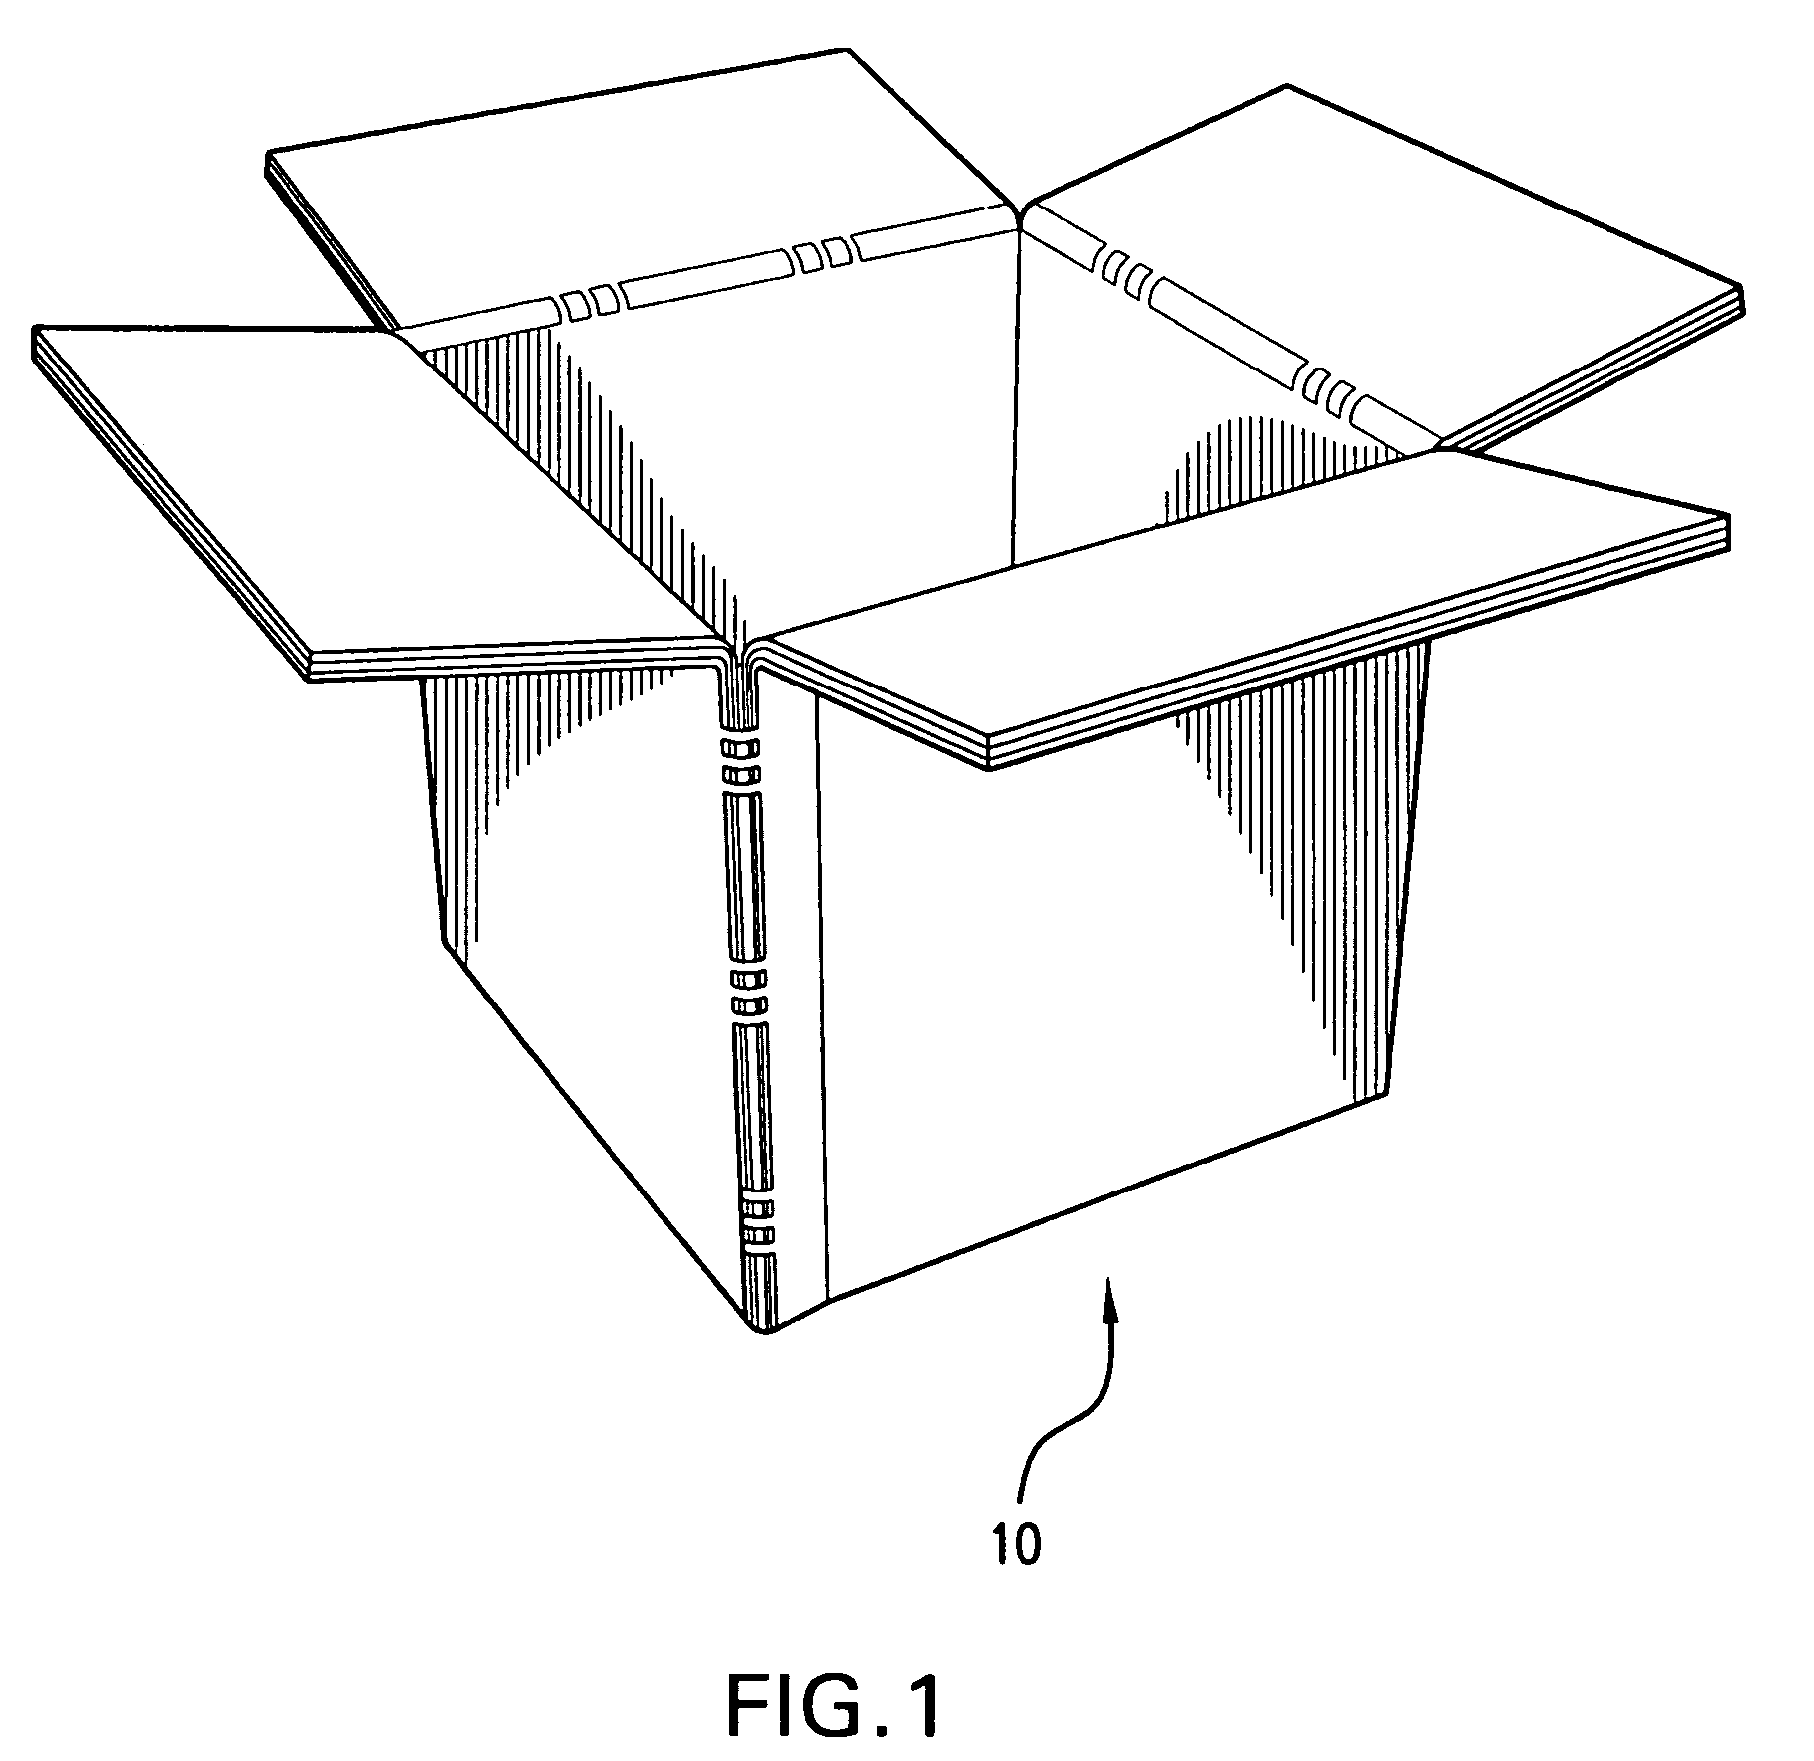 Knockdown corrugated box for temperature control and method of making